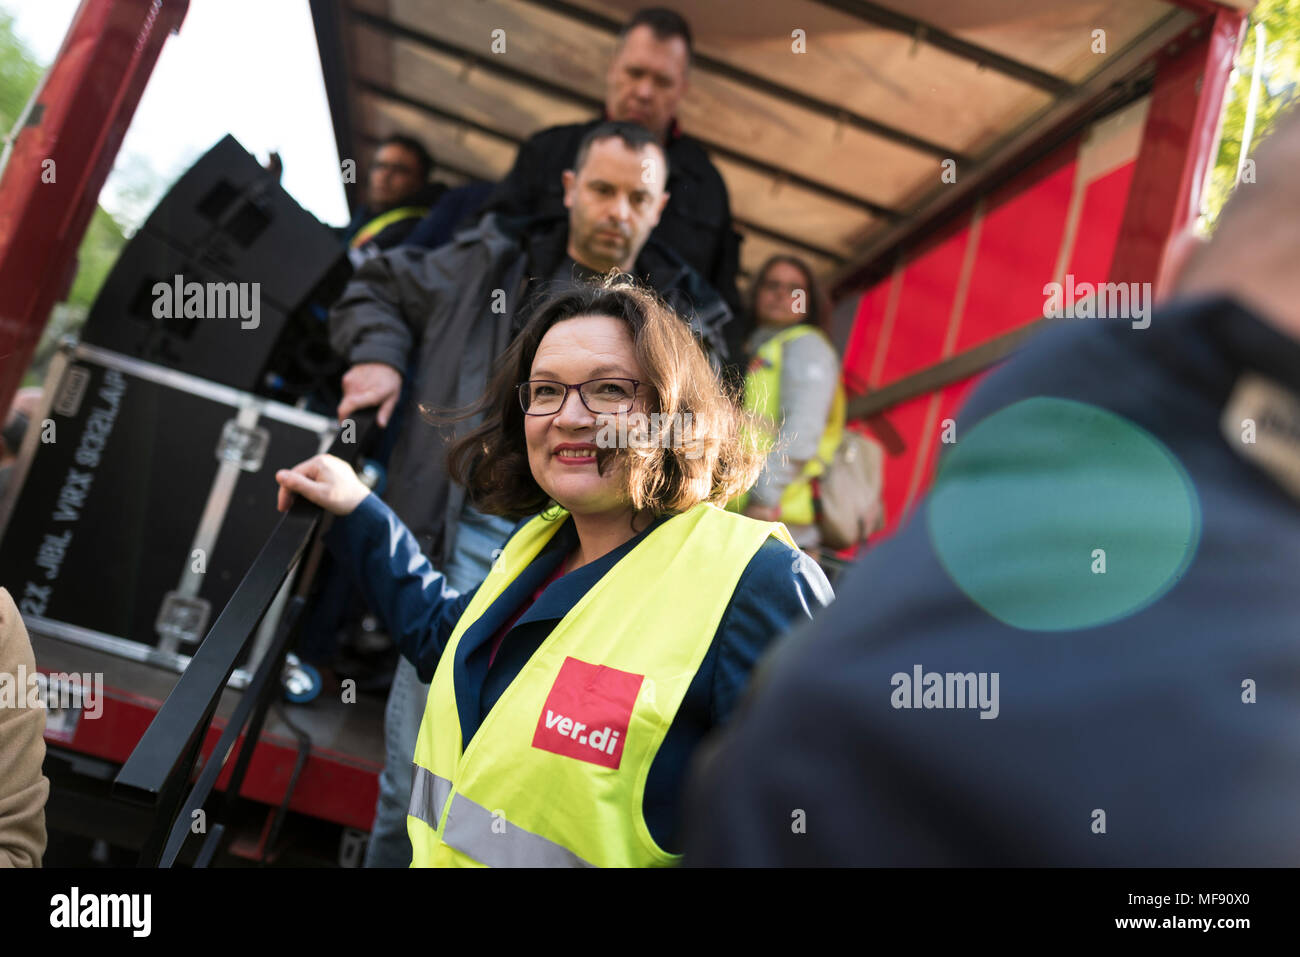 Axel C Springer High Resolution Stock Photography and Images - Alamy